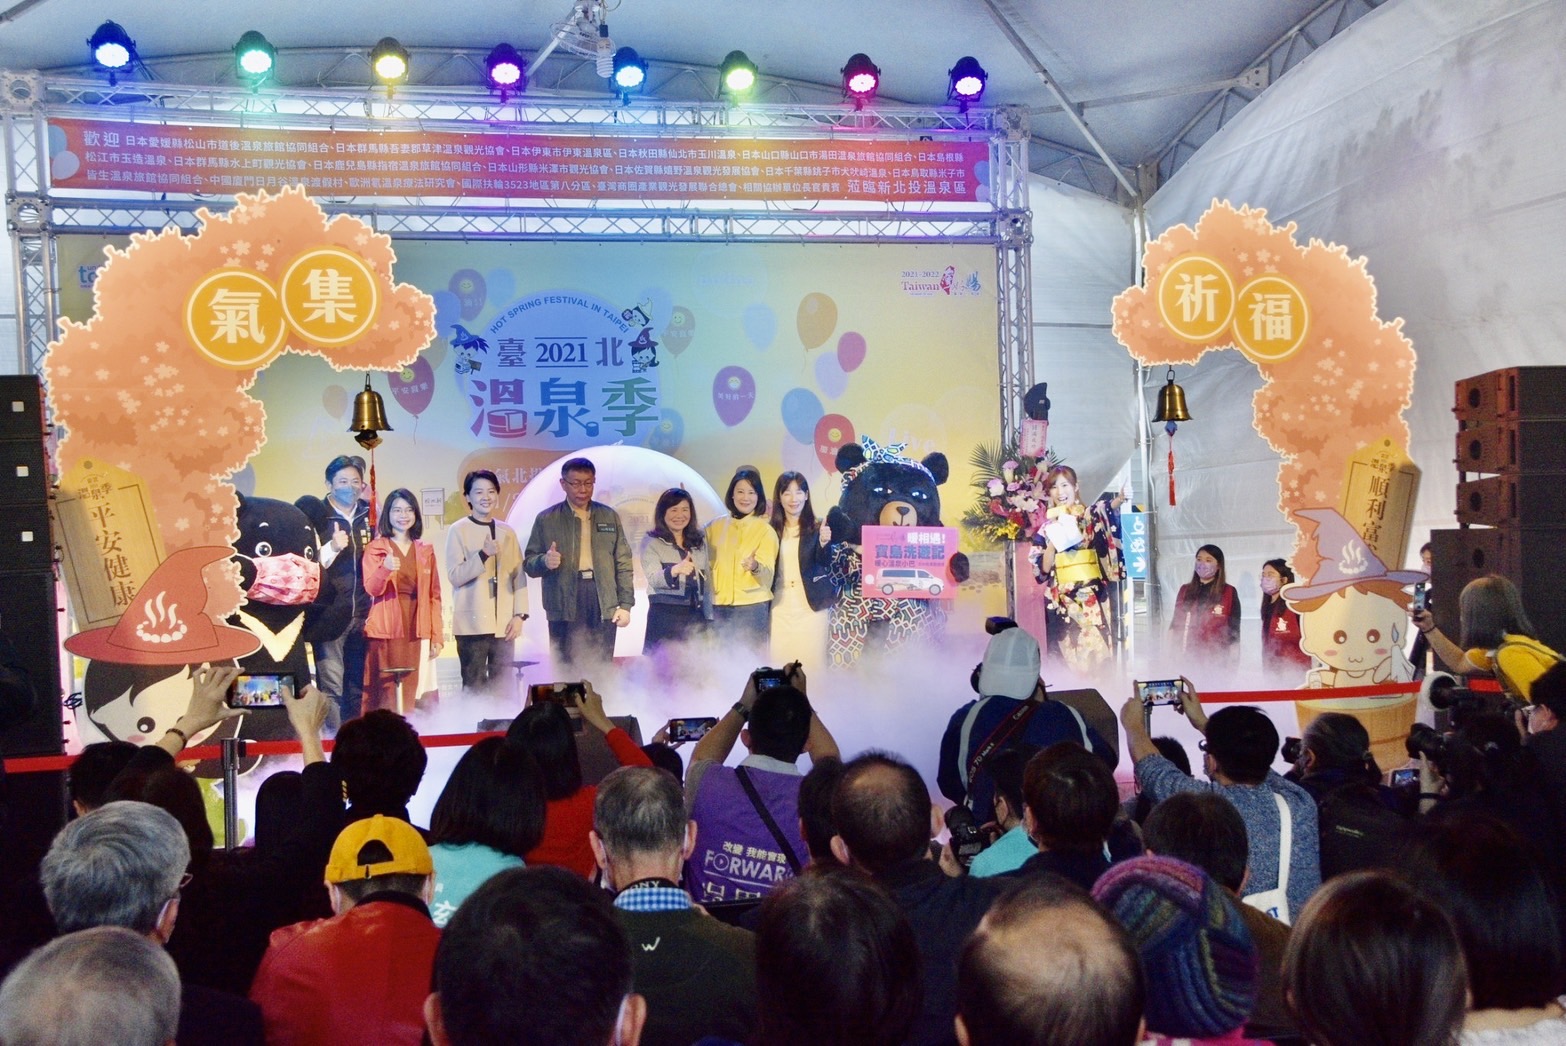 [Gas gathering north. Spring Festival 2021 Taipei Hot Spring Season 11/25 invites you to gather qi and pray for a good harvest